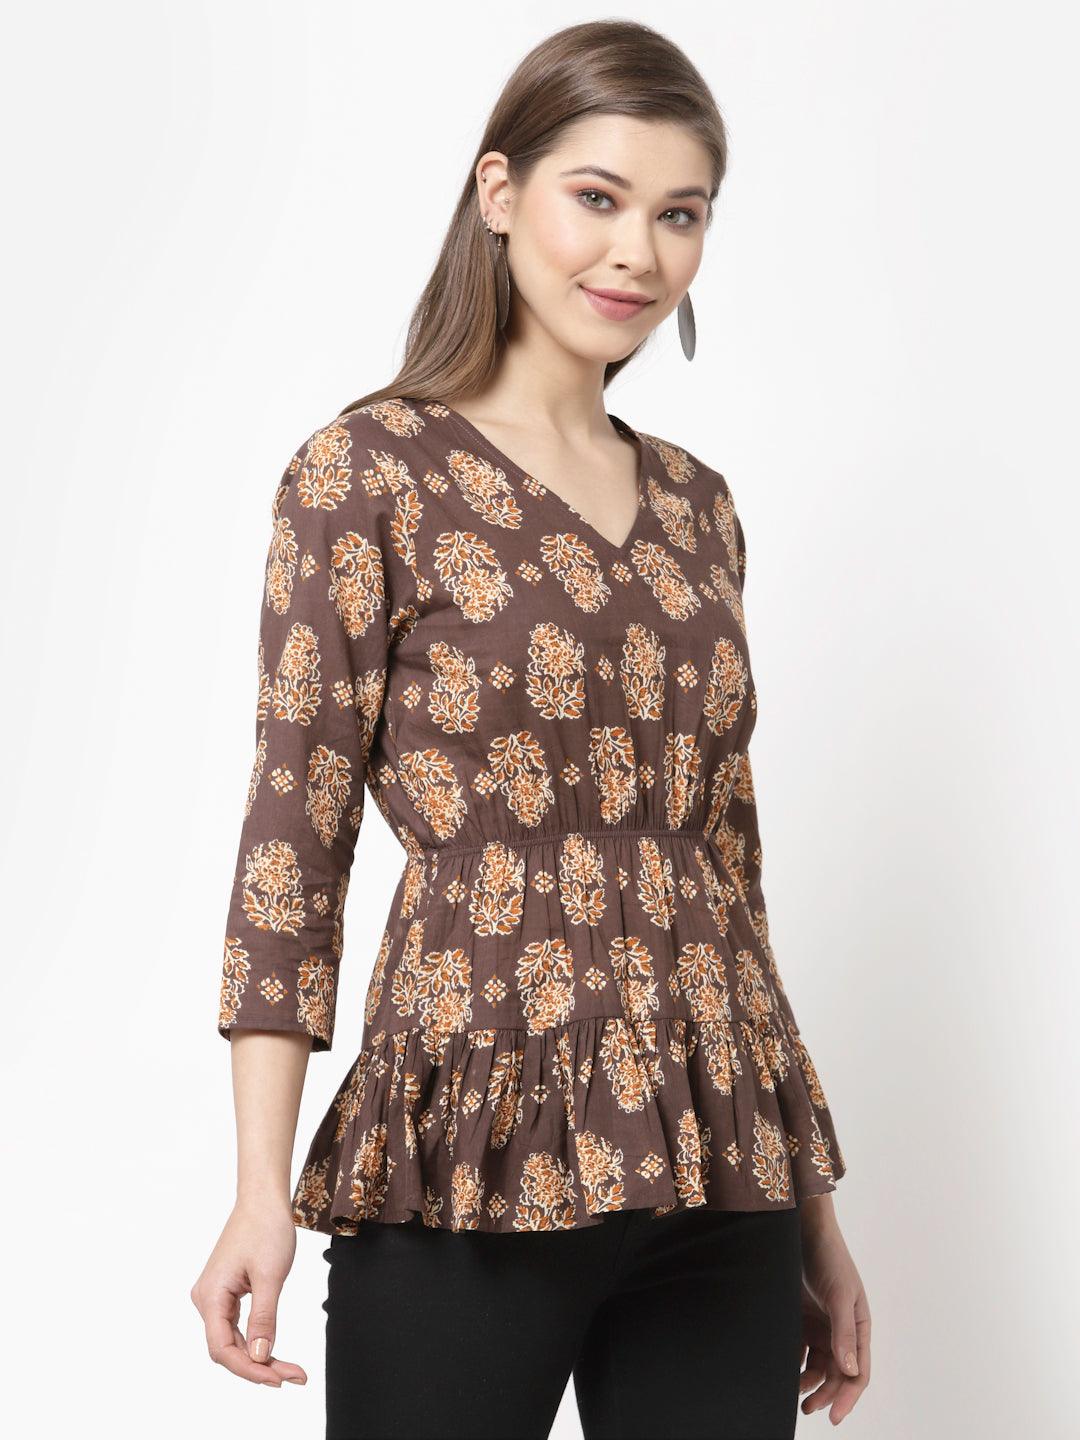 Women Brown Printed Cotton Top by Myshka (1 Pc Set) - Indiakreations